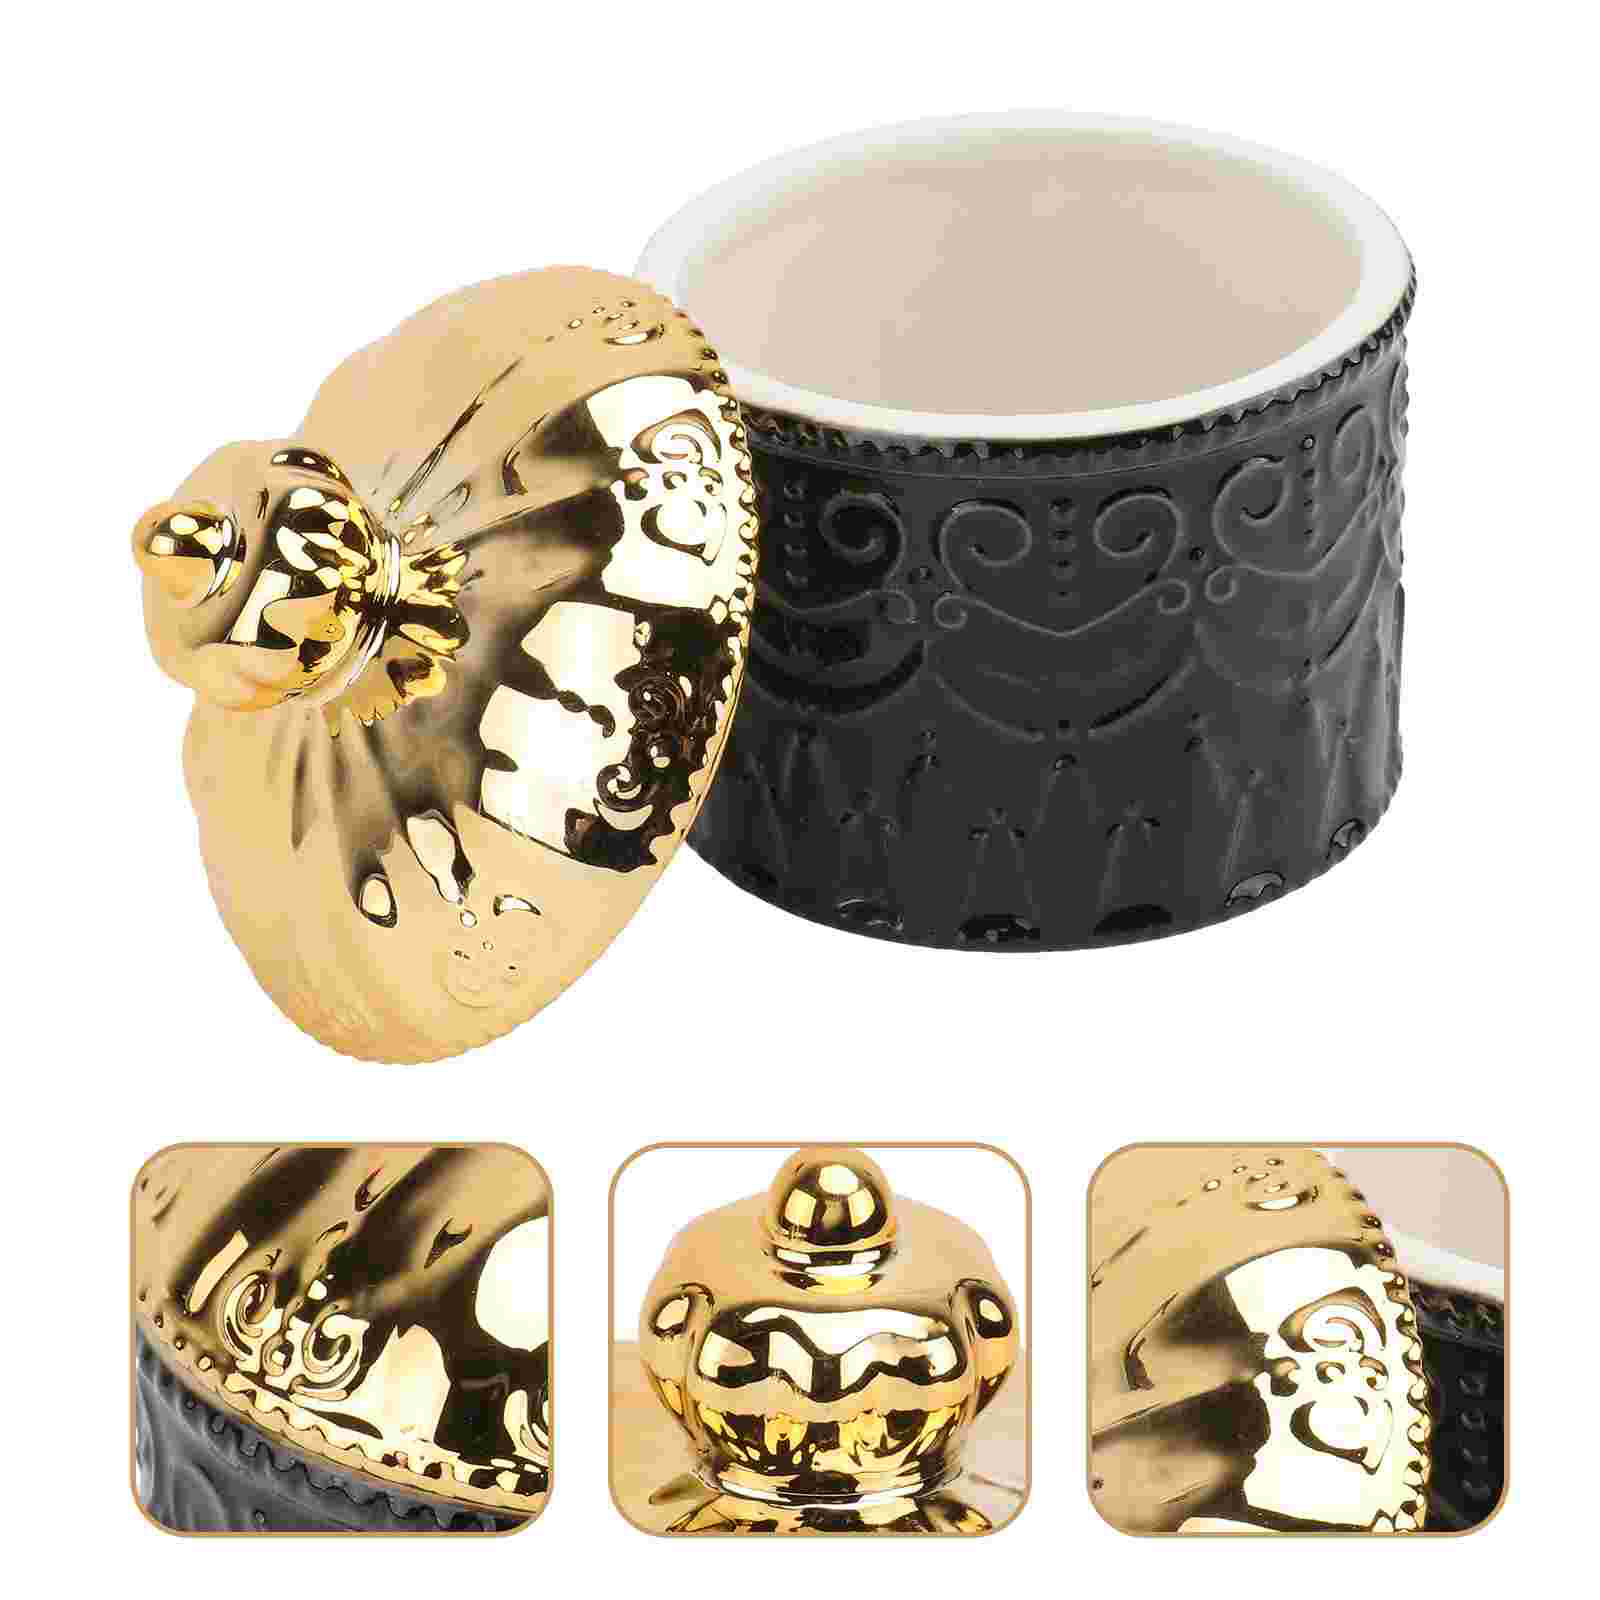 Jewelry Box Ceramic Storage Trinket Holder Case Ring Tank Candy Keepsake Trinkets Gift Pot Containers Makeup Engagement